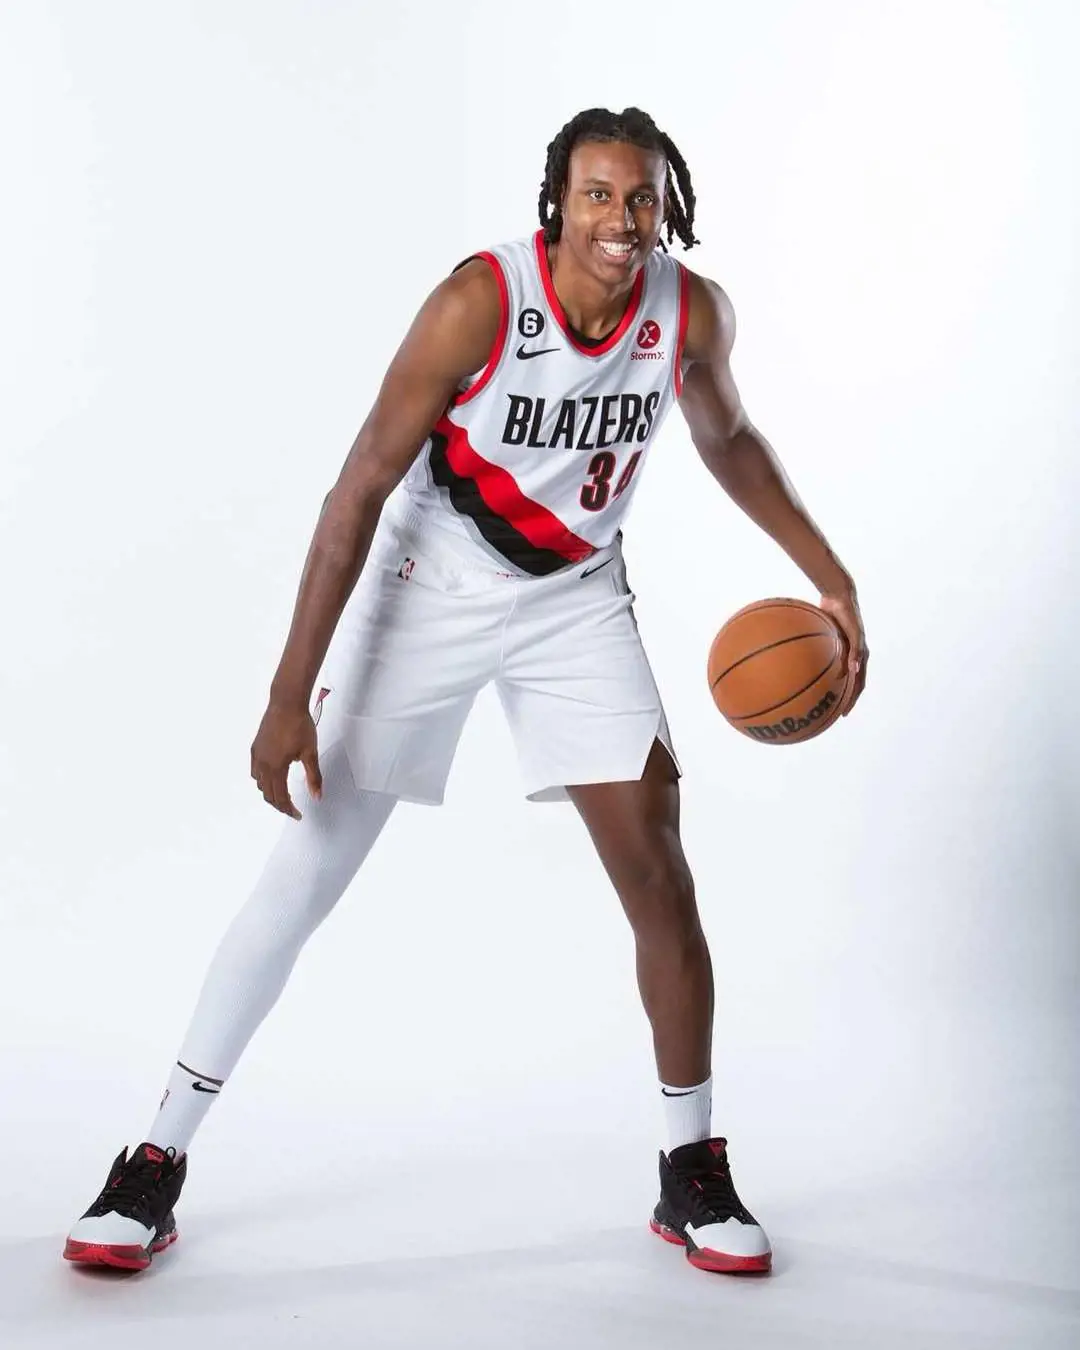 Jabari got a $1.01 million in his first year as the 57th pick in the NBA draft 2022 by Portland Blazers.